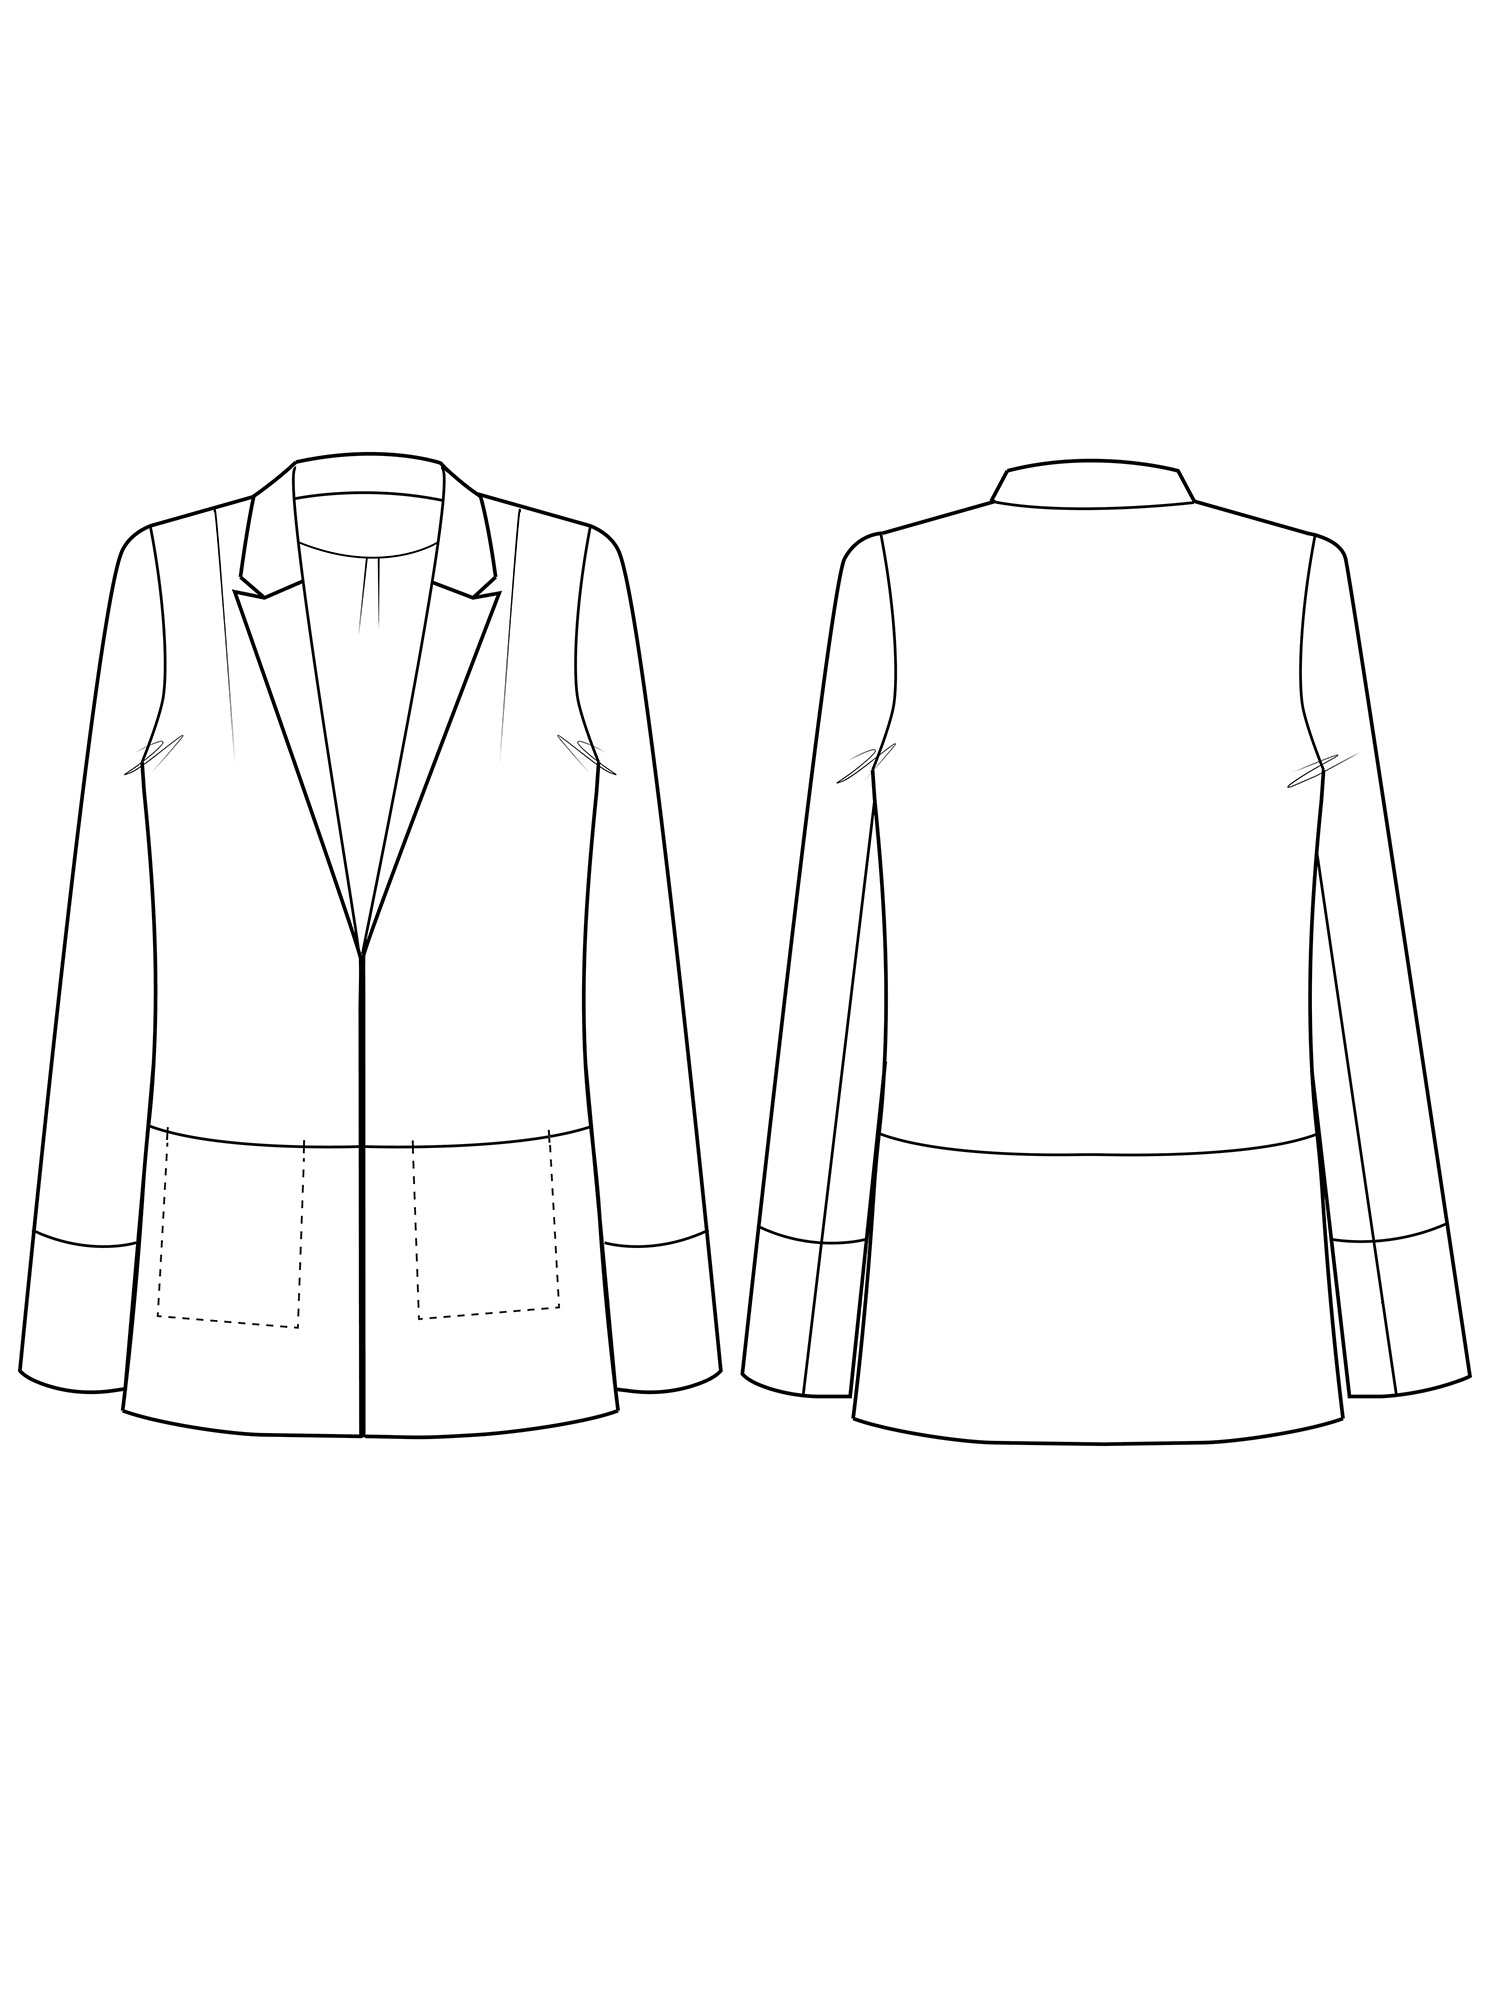 Meet our new sewing pattern – THE BLAZER – The Avid Seamstress